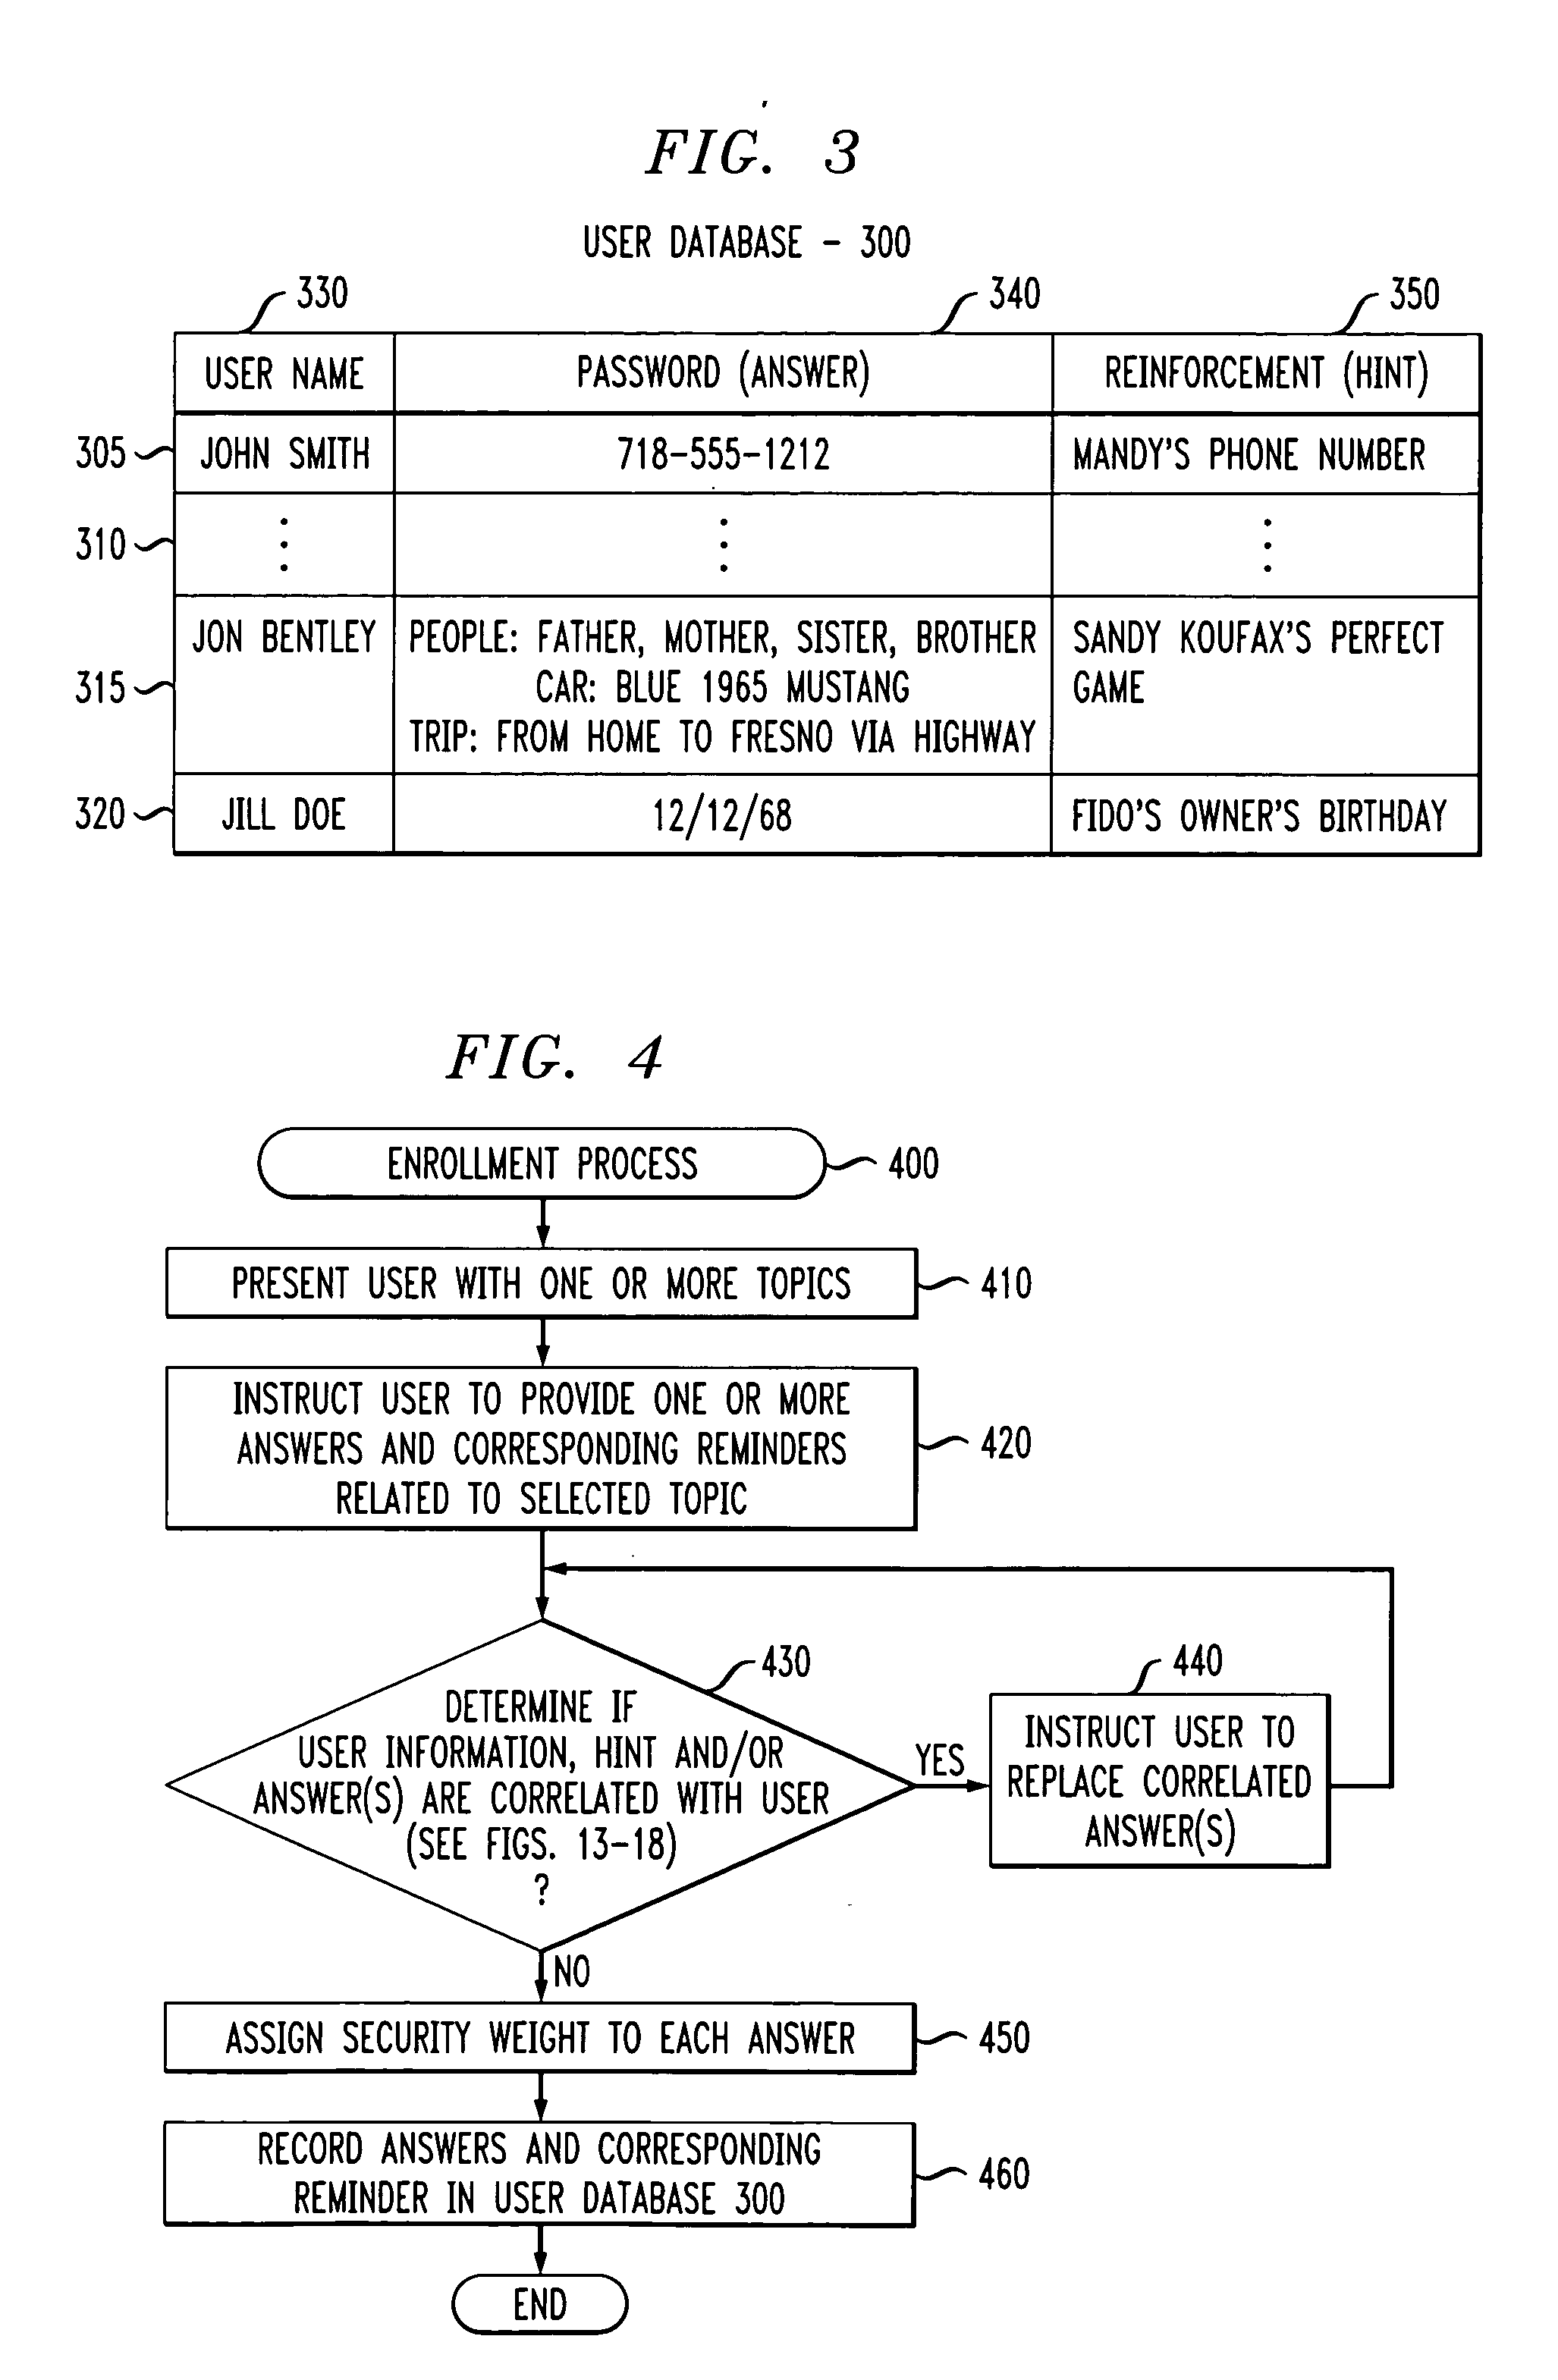 Method and apparatus for verifying security of authentication information extracted from a user